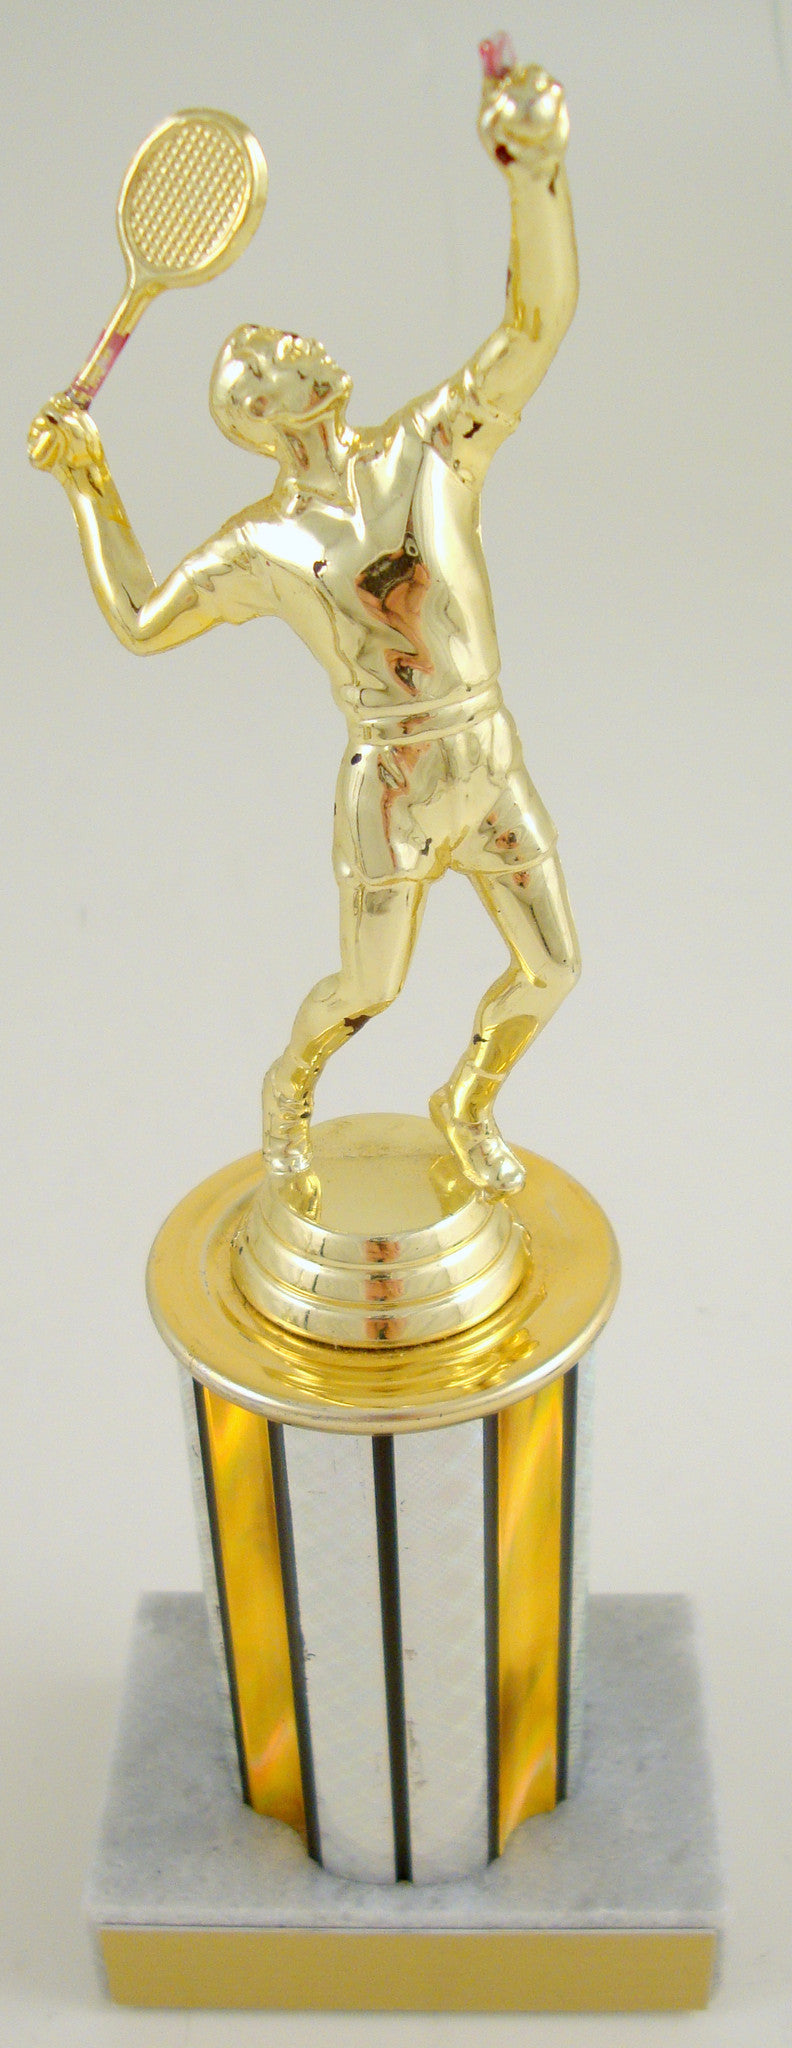 Tennis Trophy With Round Column on Marble Base-Trophies-Schoppy&